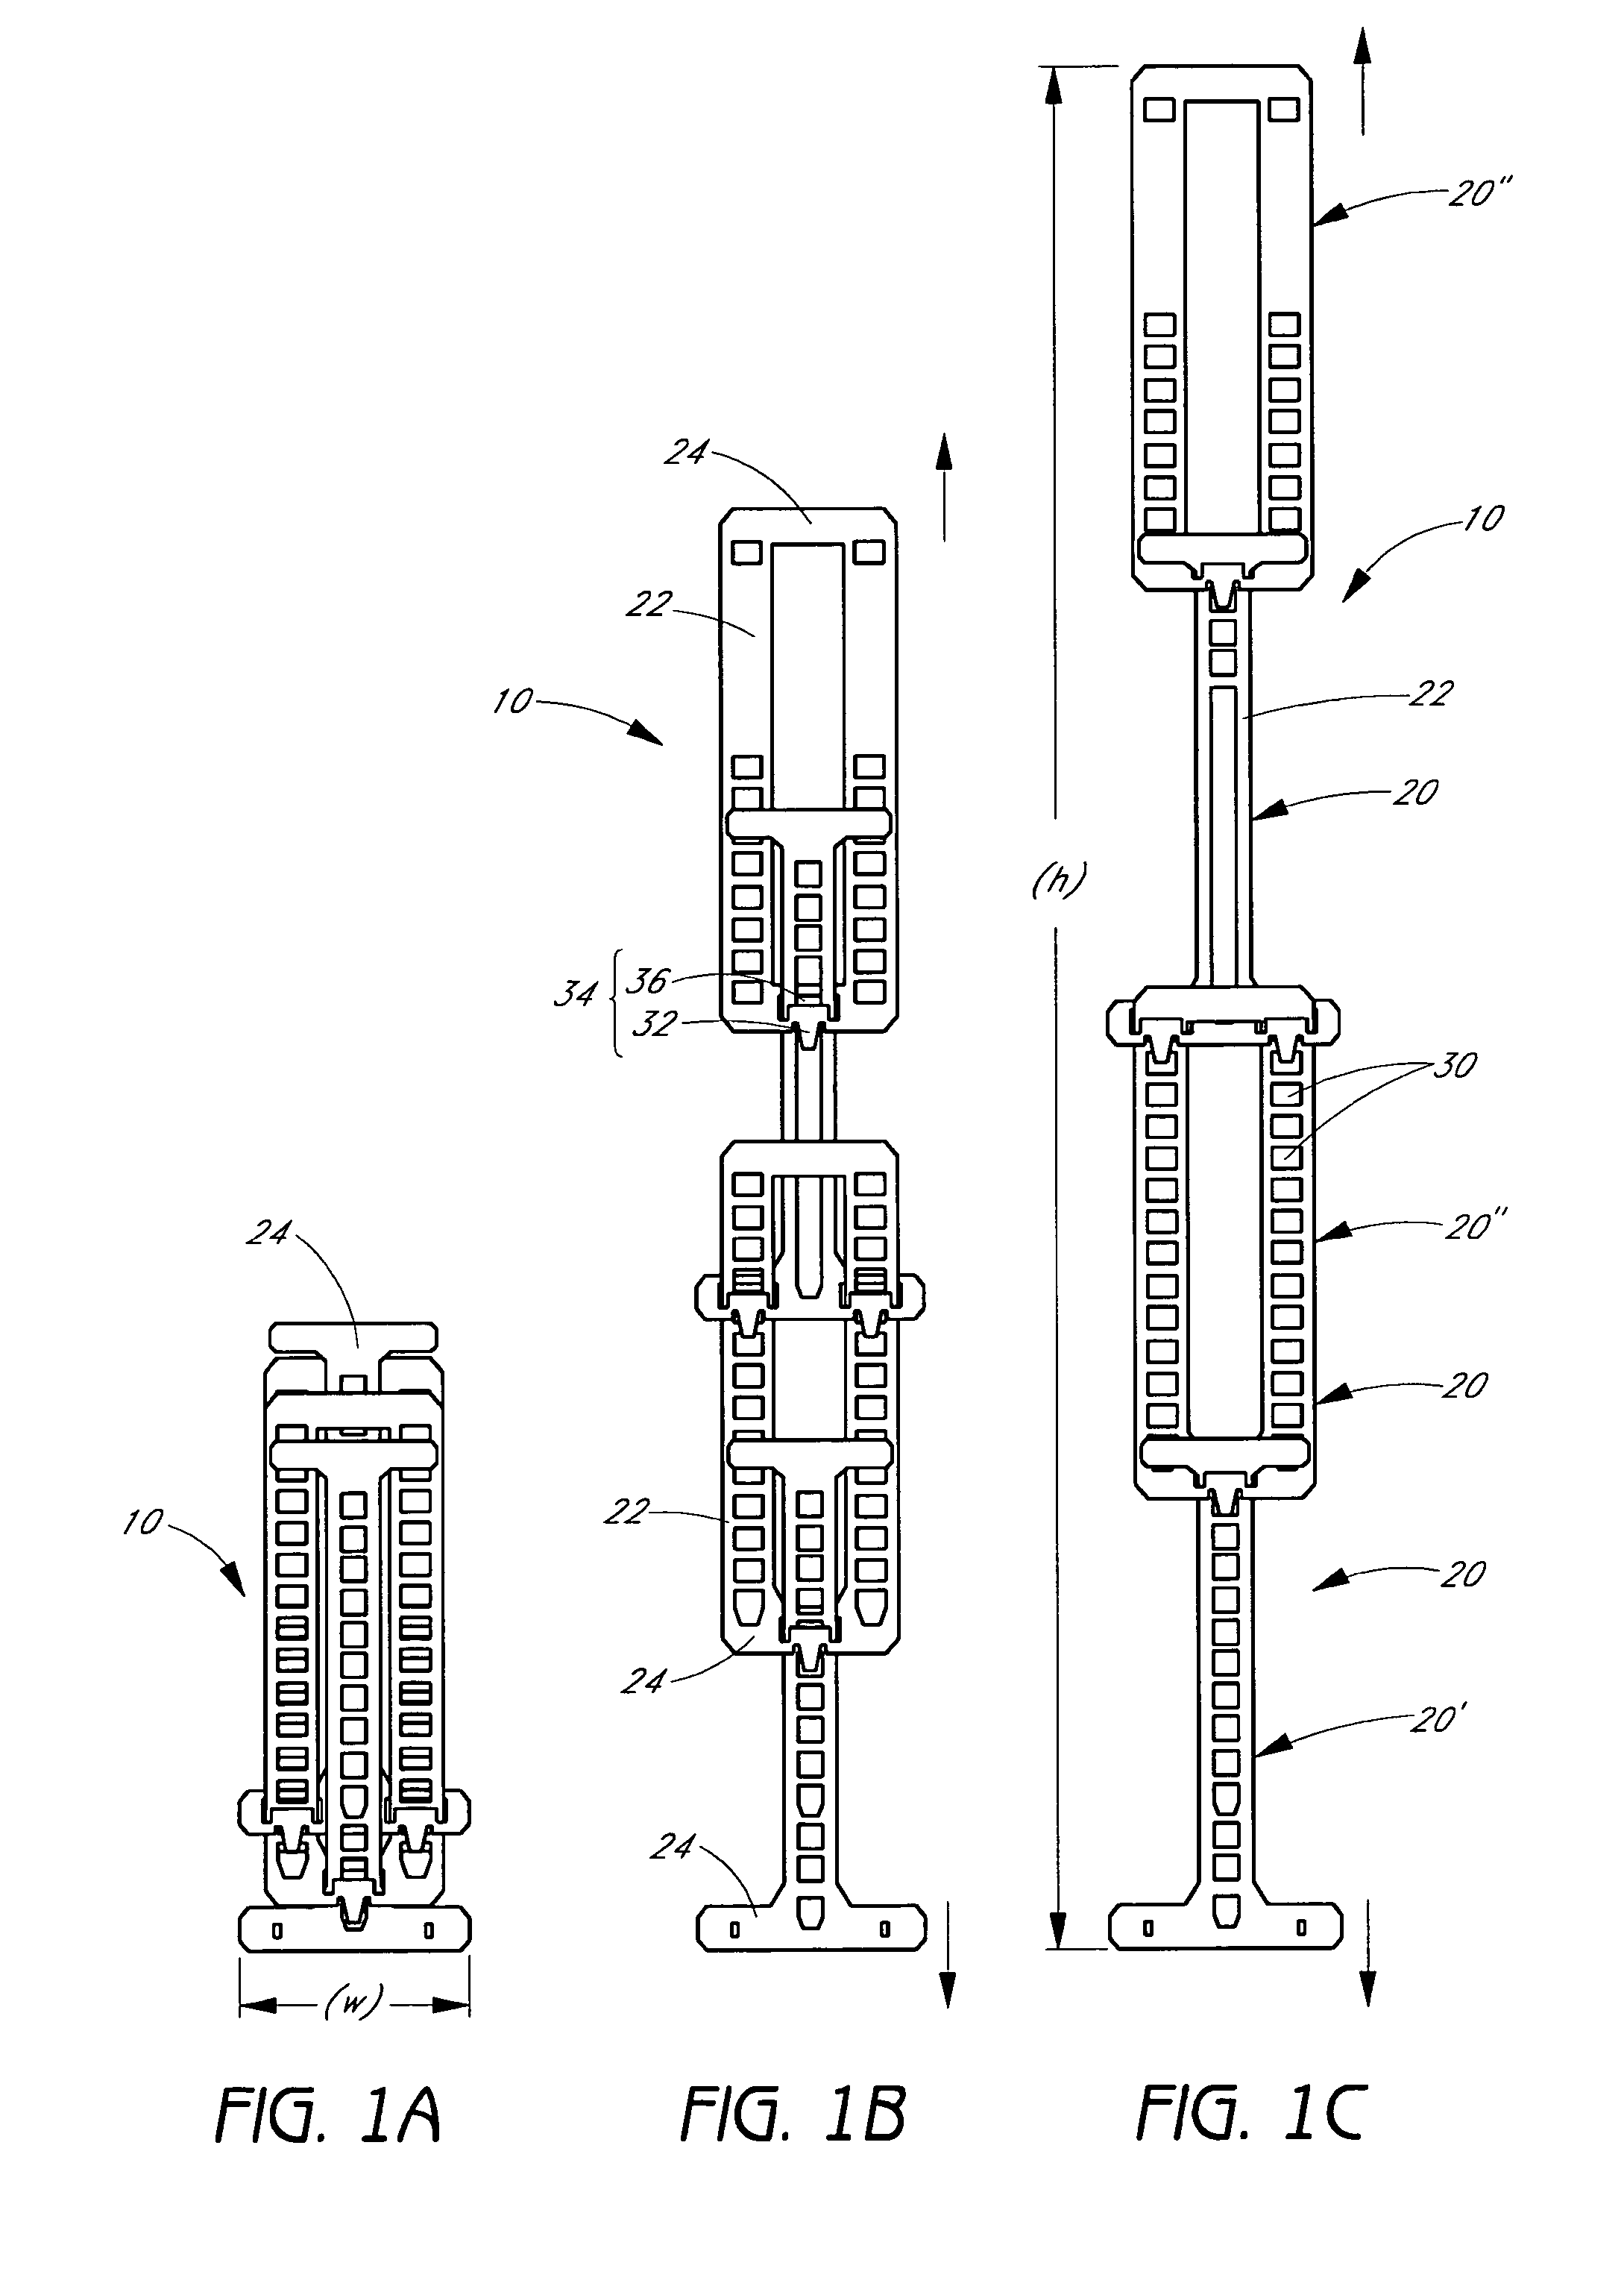 Expandable stent with sliding and locking radial elements